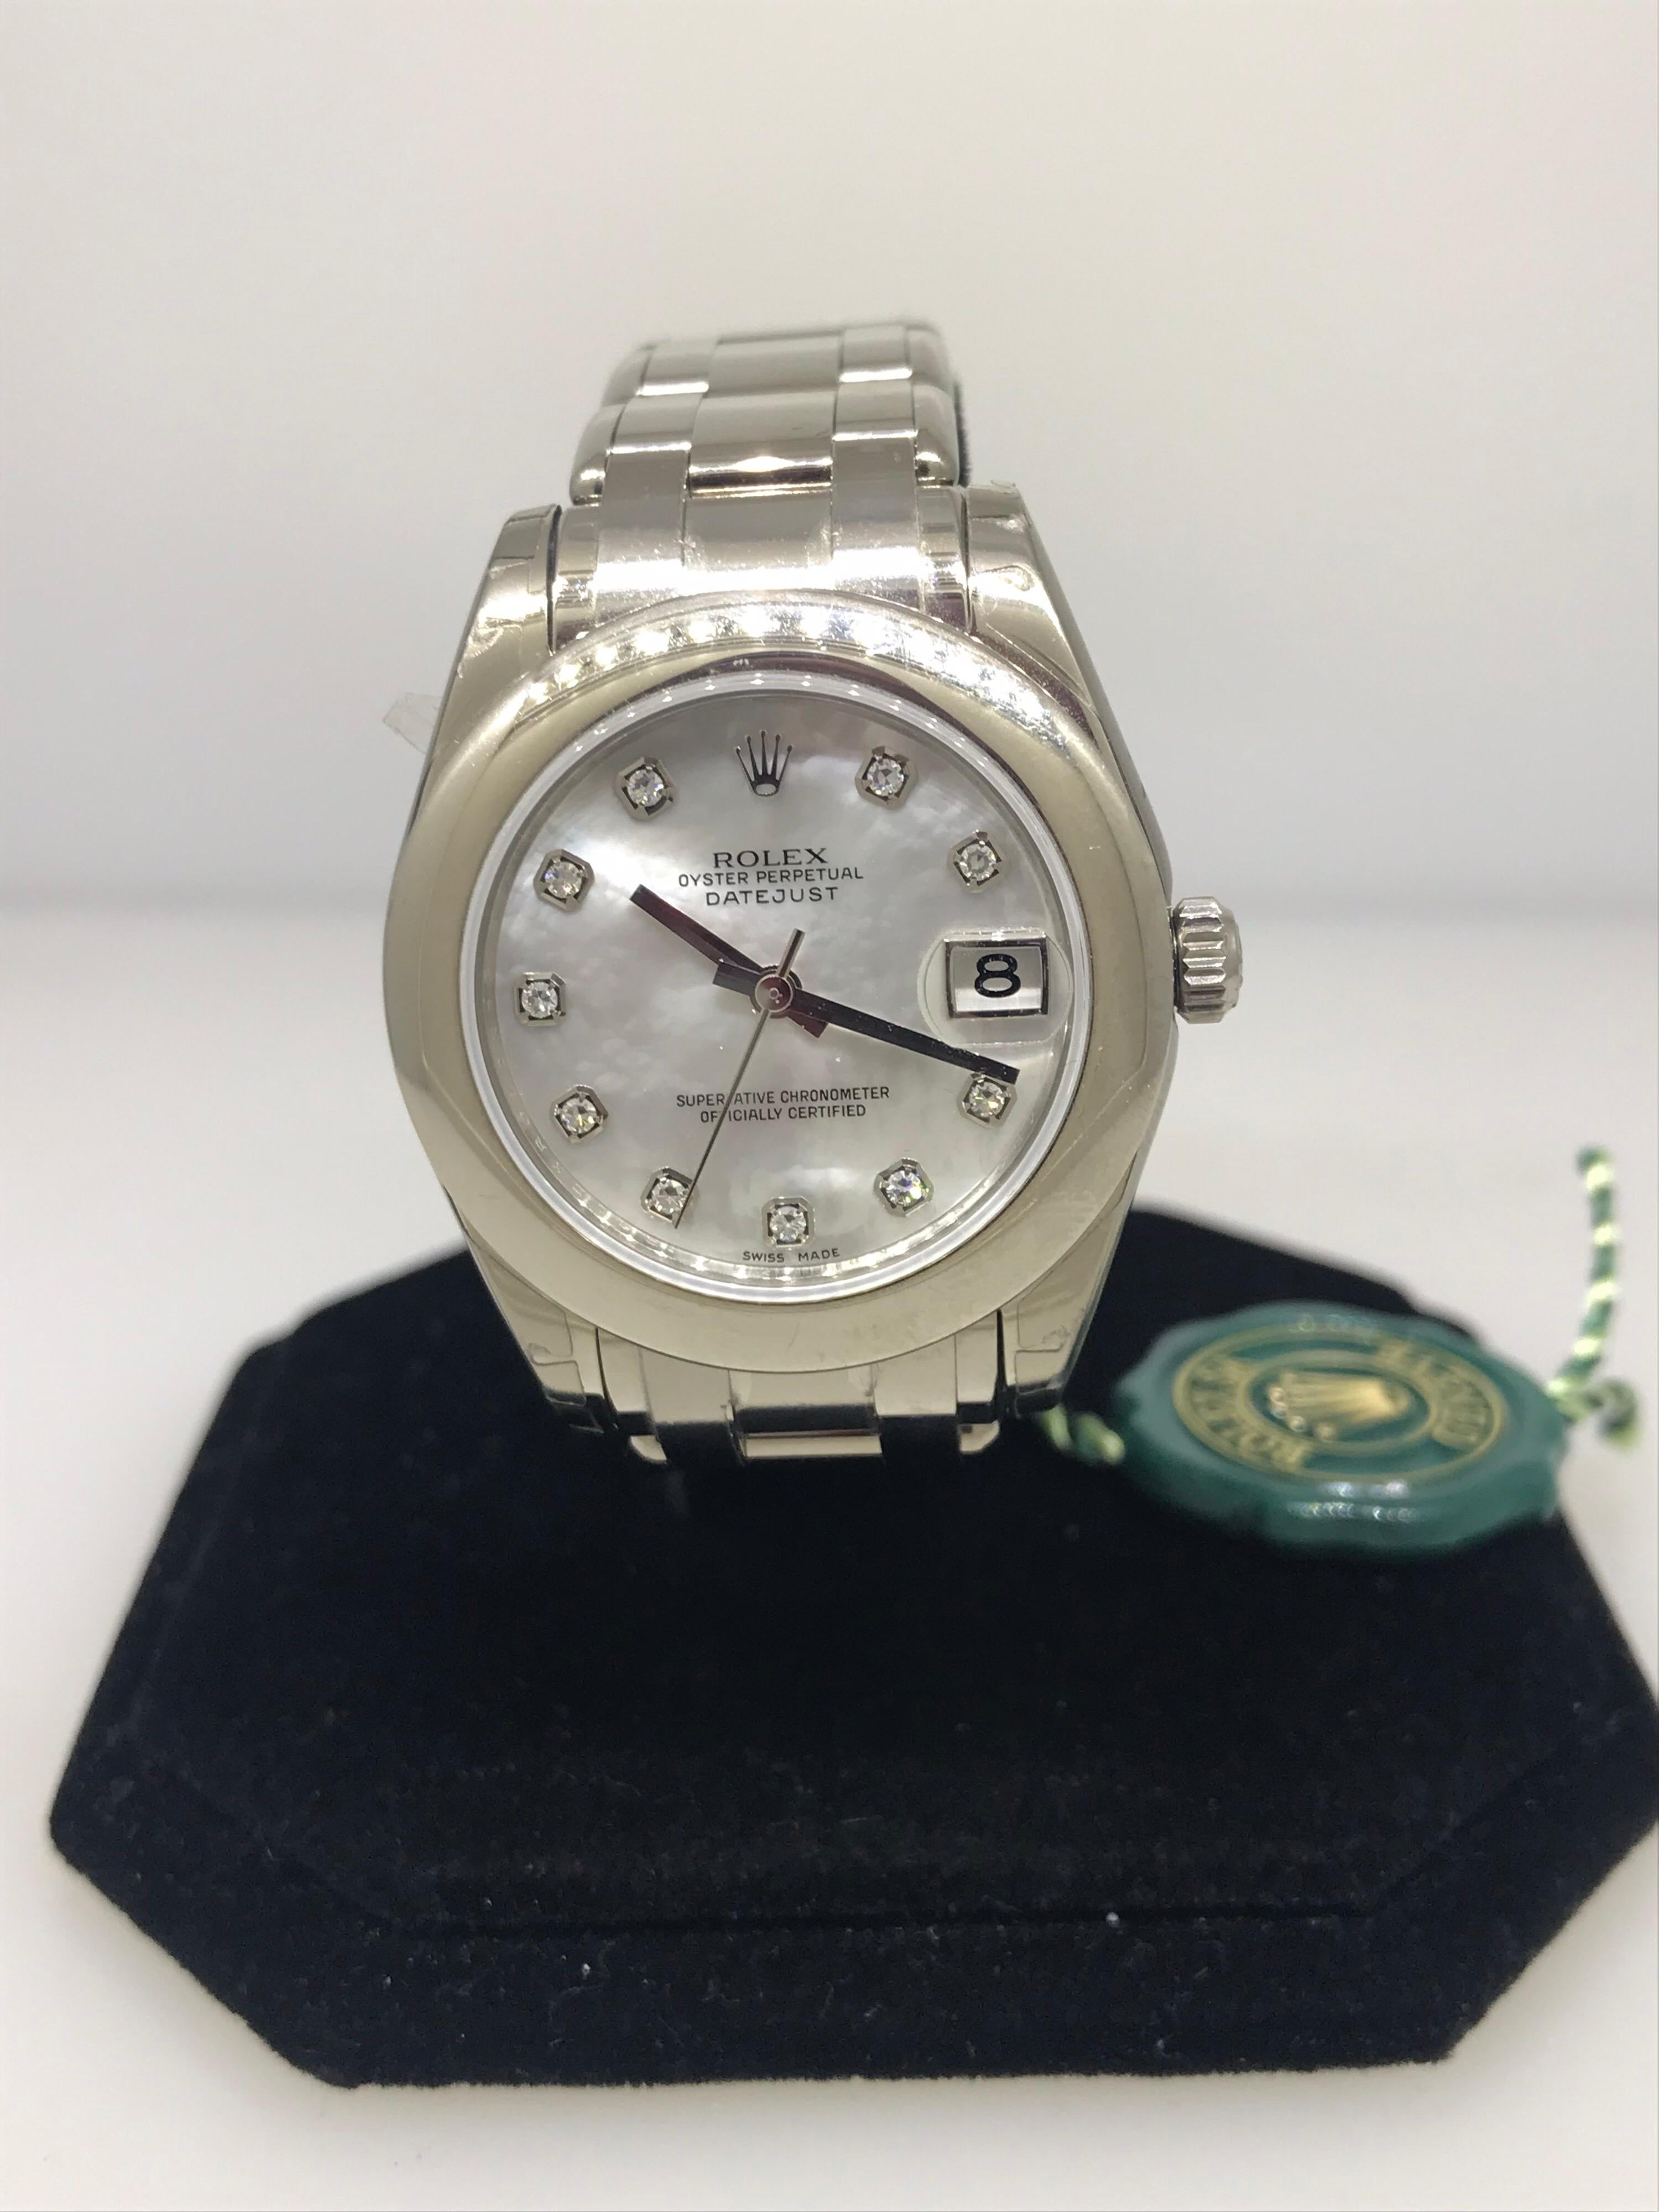 Rolex Datejust Pearlmaster Ladies Watch

Model Number: 81209

100% Authentic

Brand New

Comes with original Rolex box, warranty card and instruction manual

18 Karat White Gold Case & Bracelet

Domed Bezel

Mother of Pearl Dial

Diamond Hour